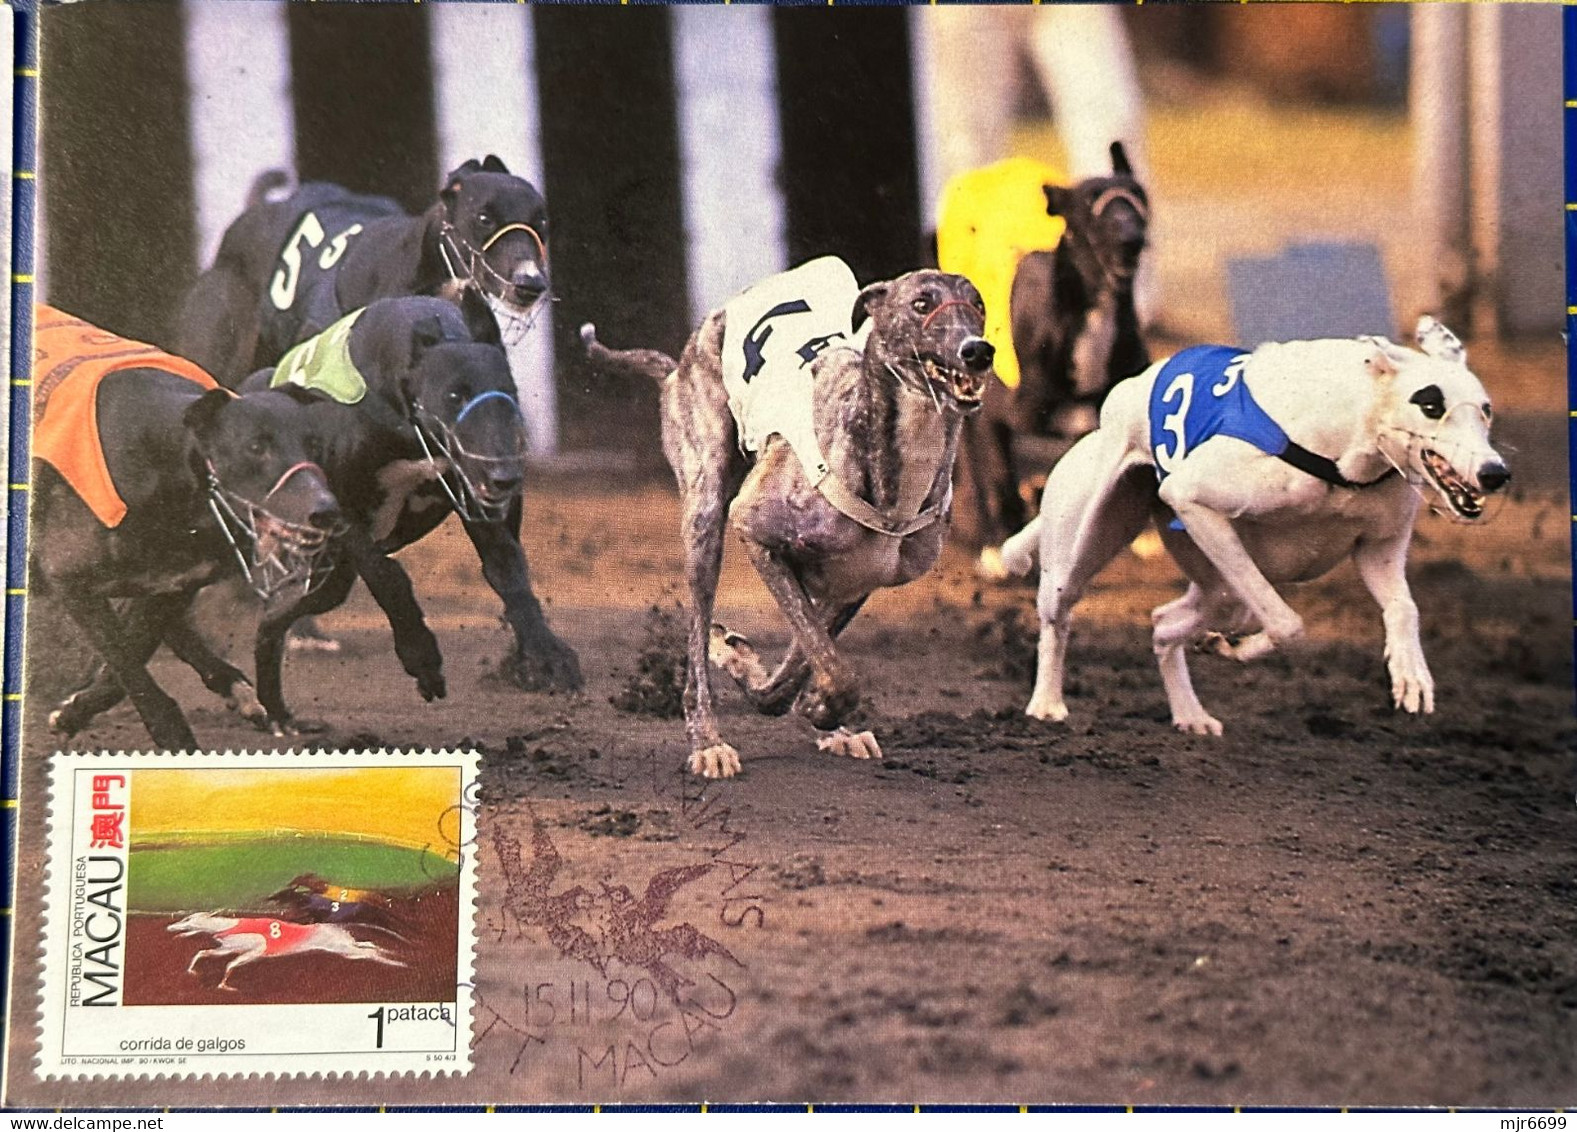 MACAU - 1990  GAMES WITH ANIMALS ISSUE SET OF 4 MAX CARD (CANCEL - FIRST DAY) - Cartes-maximum